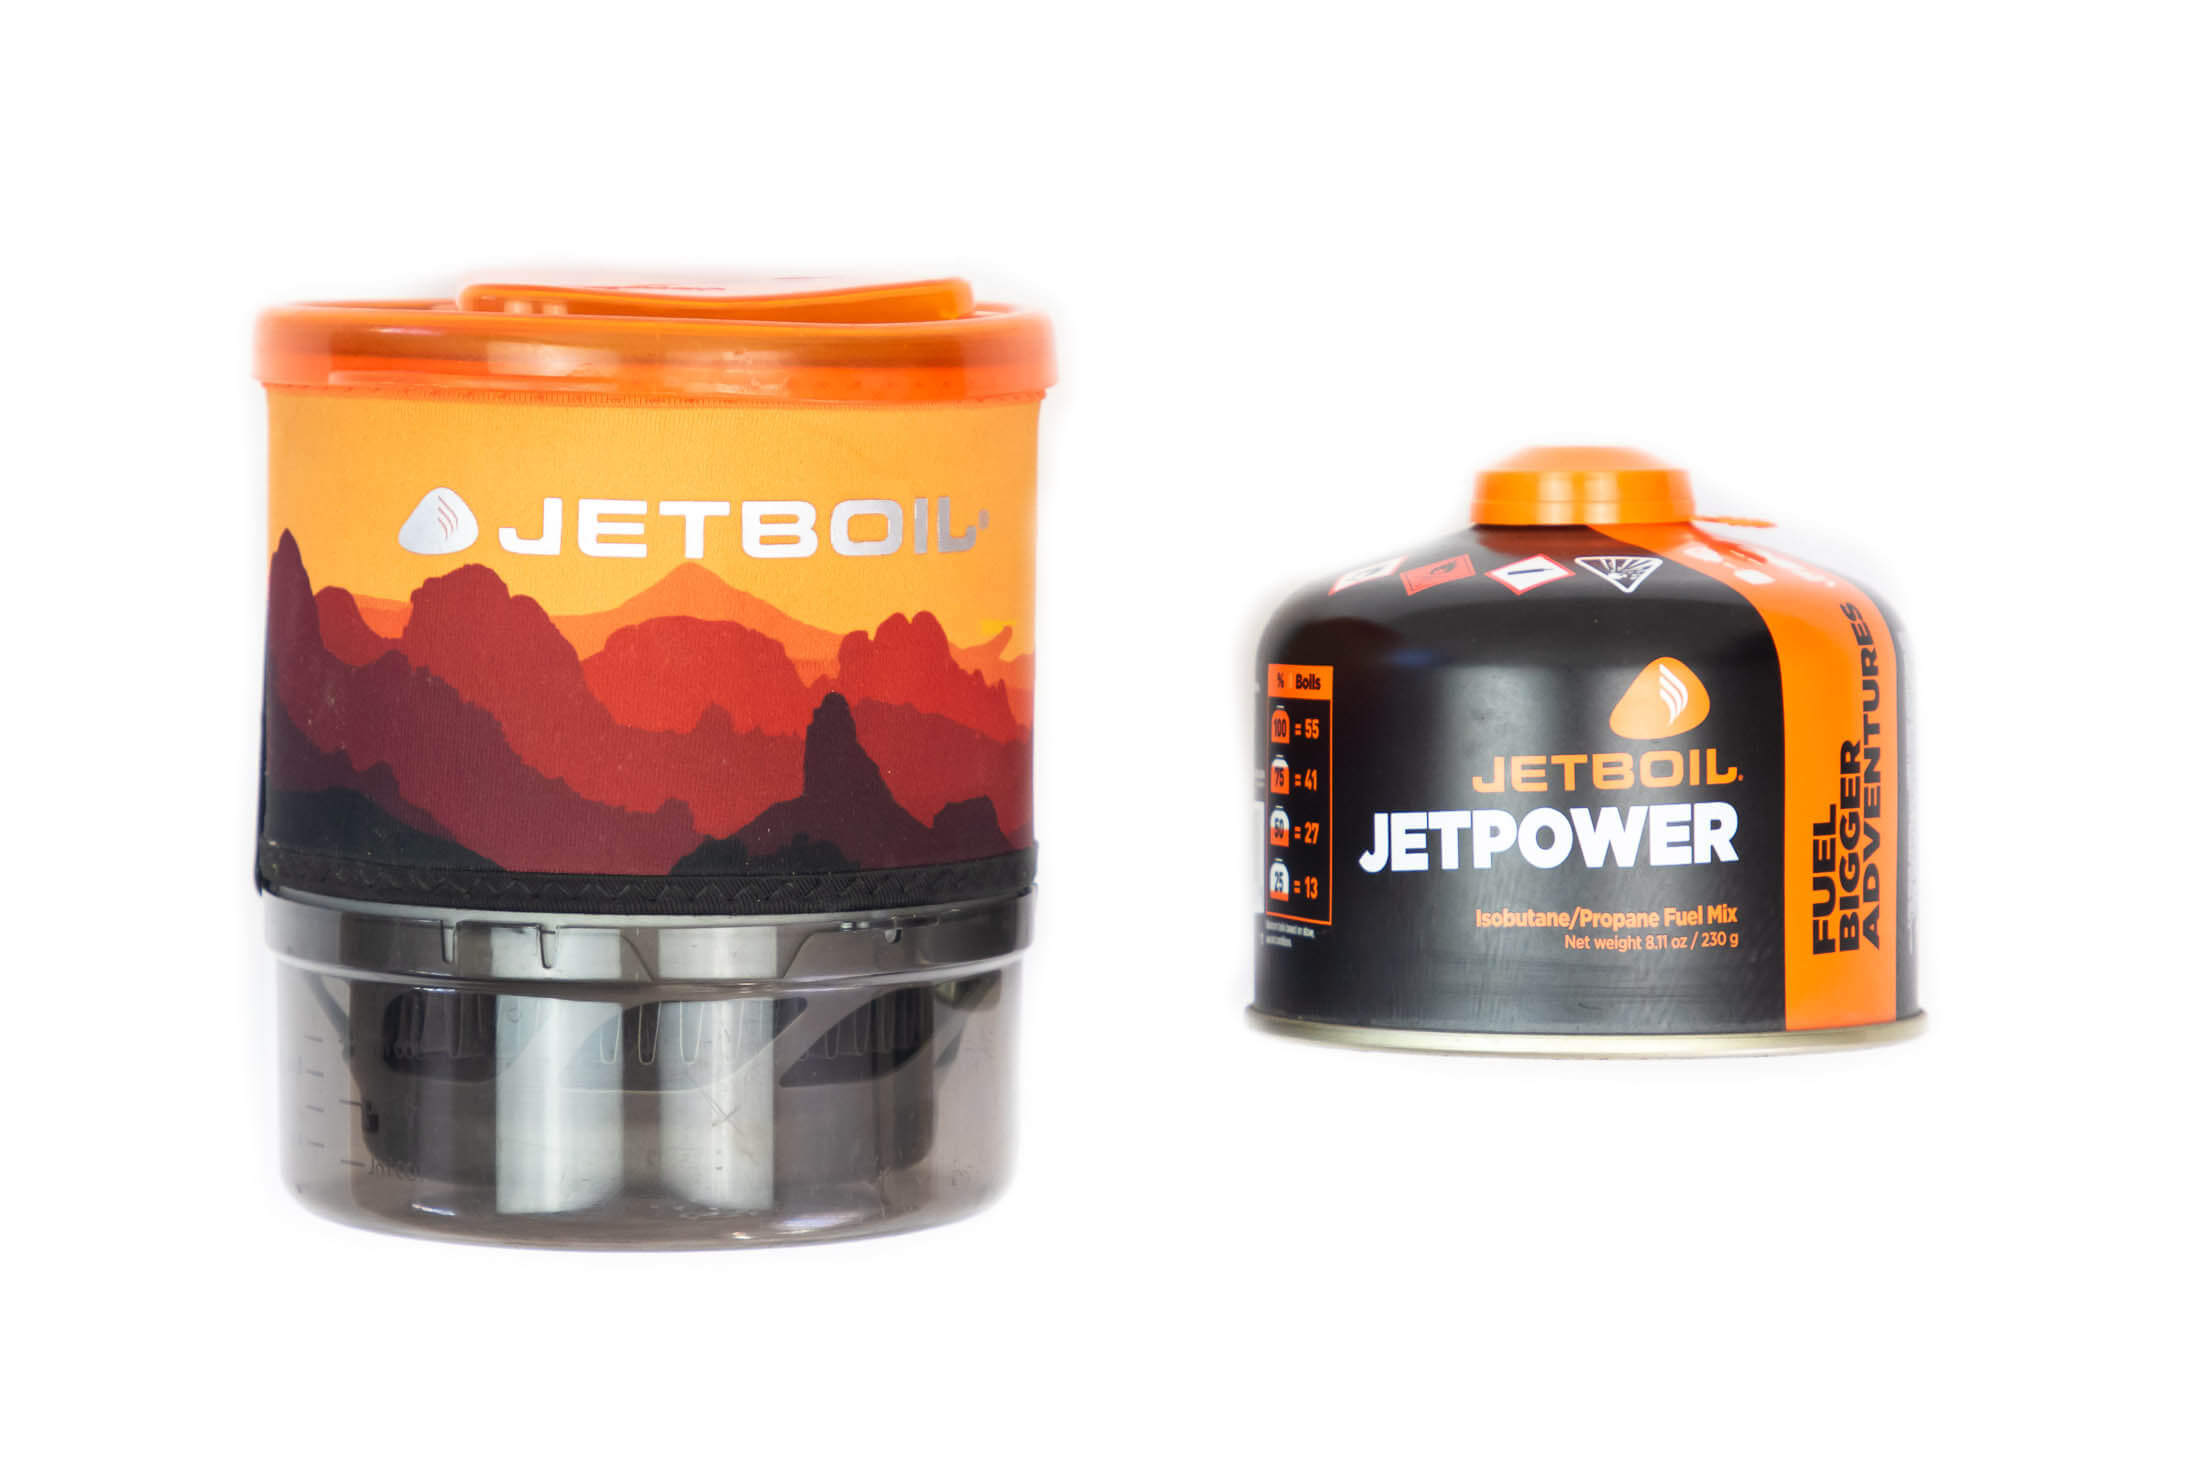 Jetboil stove and canister